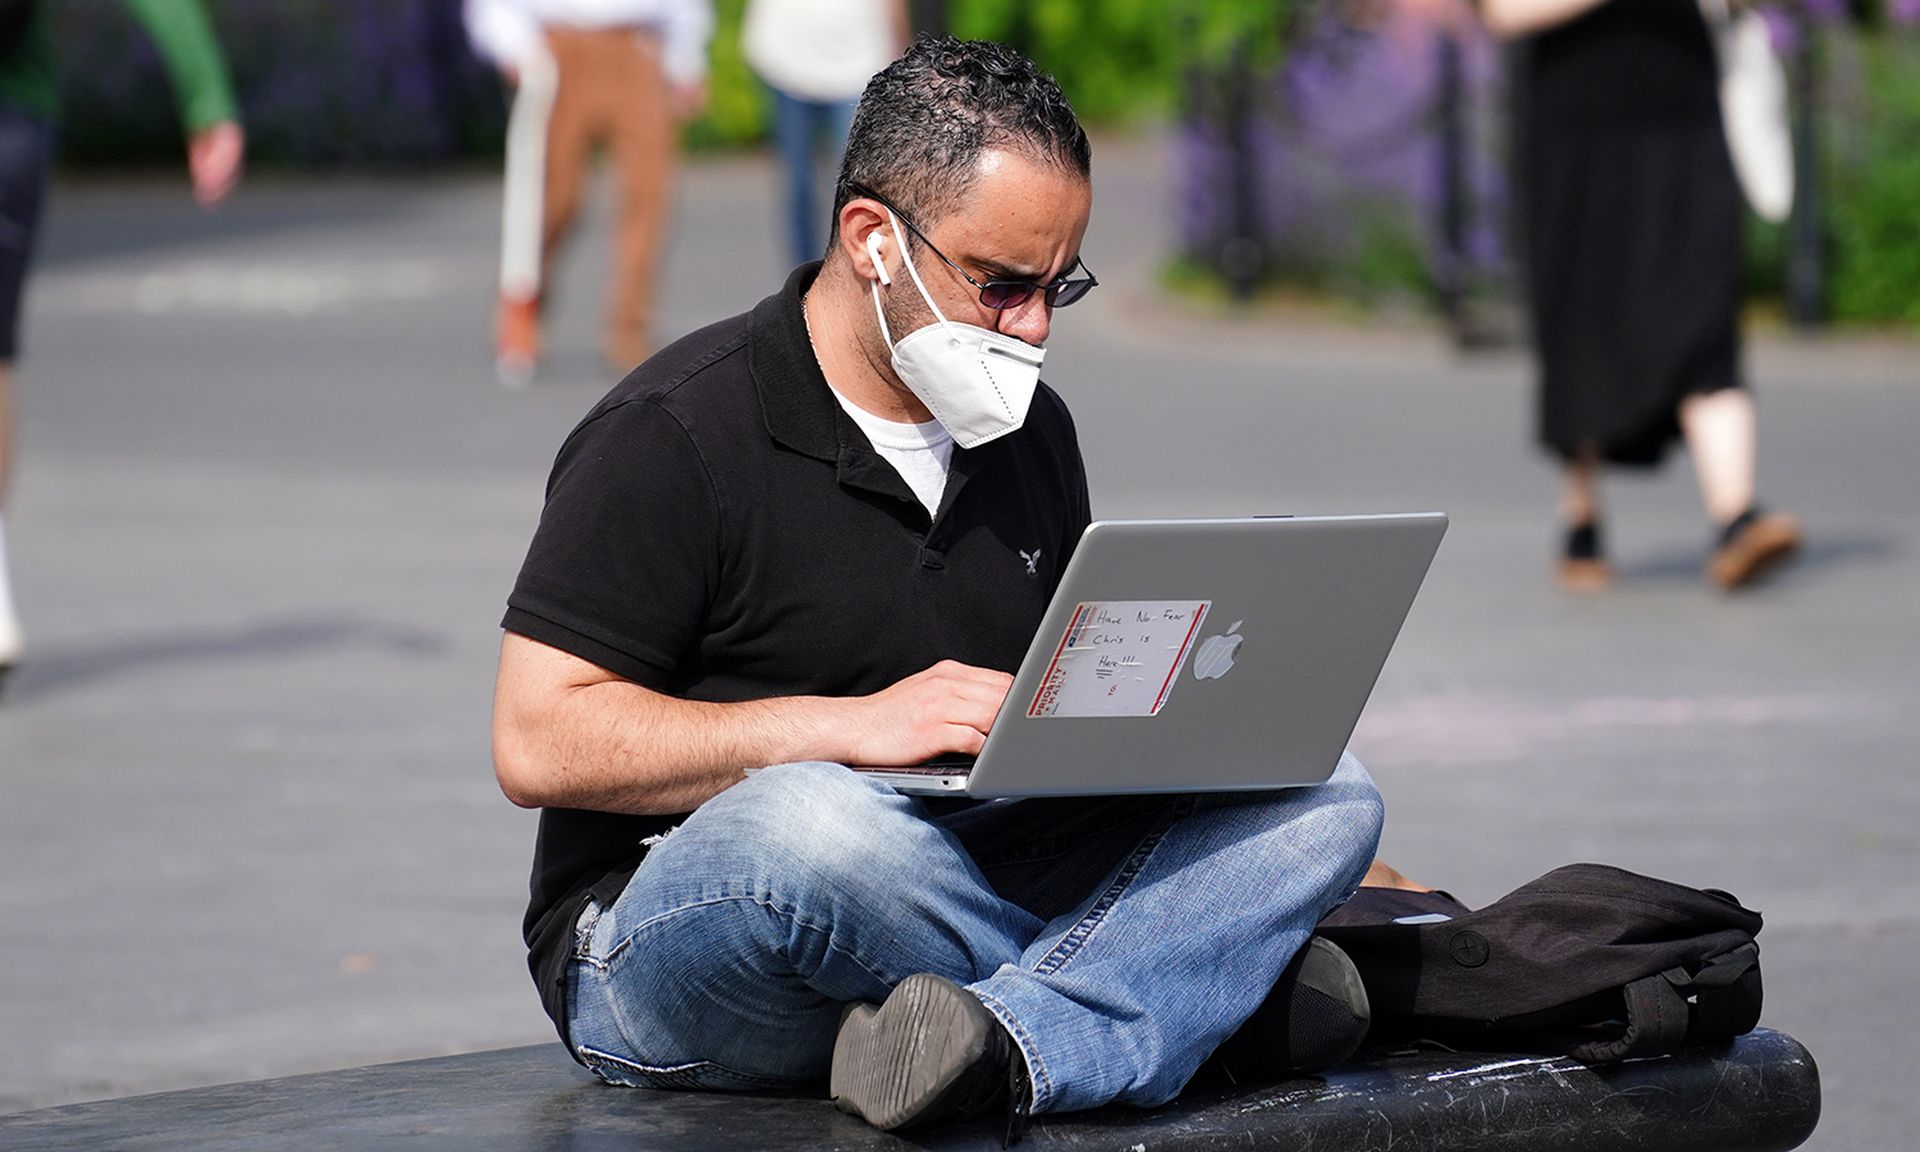 A man wearing a protective mask uses a laptop in Washington Square Park during the coronavirus pandemic on May 27, 2020, in New York City. (Photo by Cindy Ord/Getty Images)